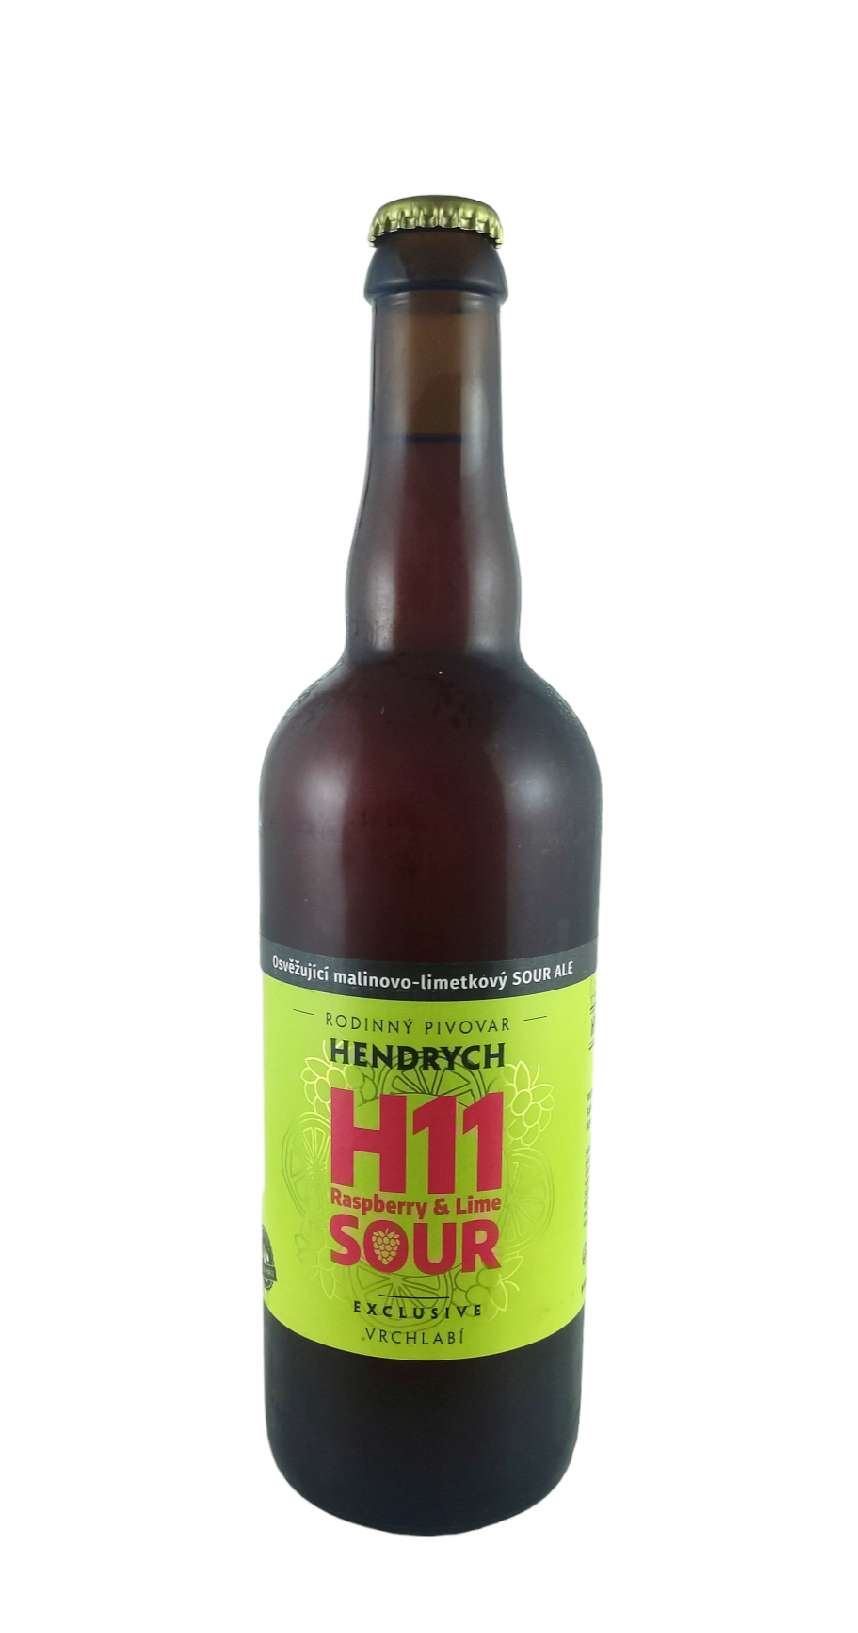 Hendrych Raspberry & Lime Sour 11°